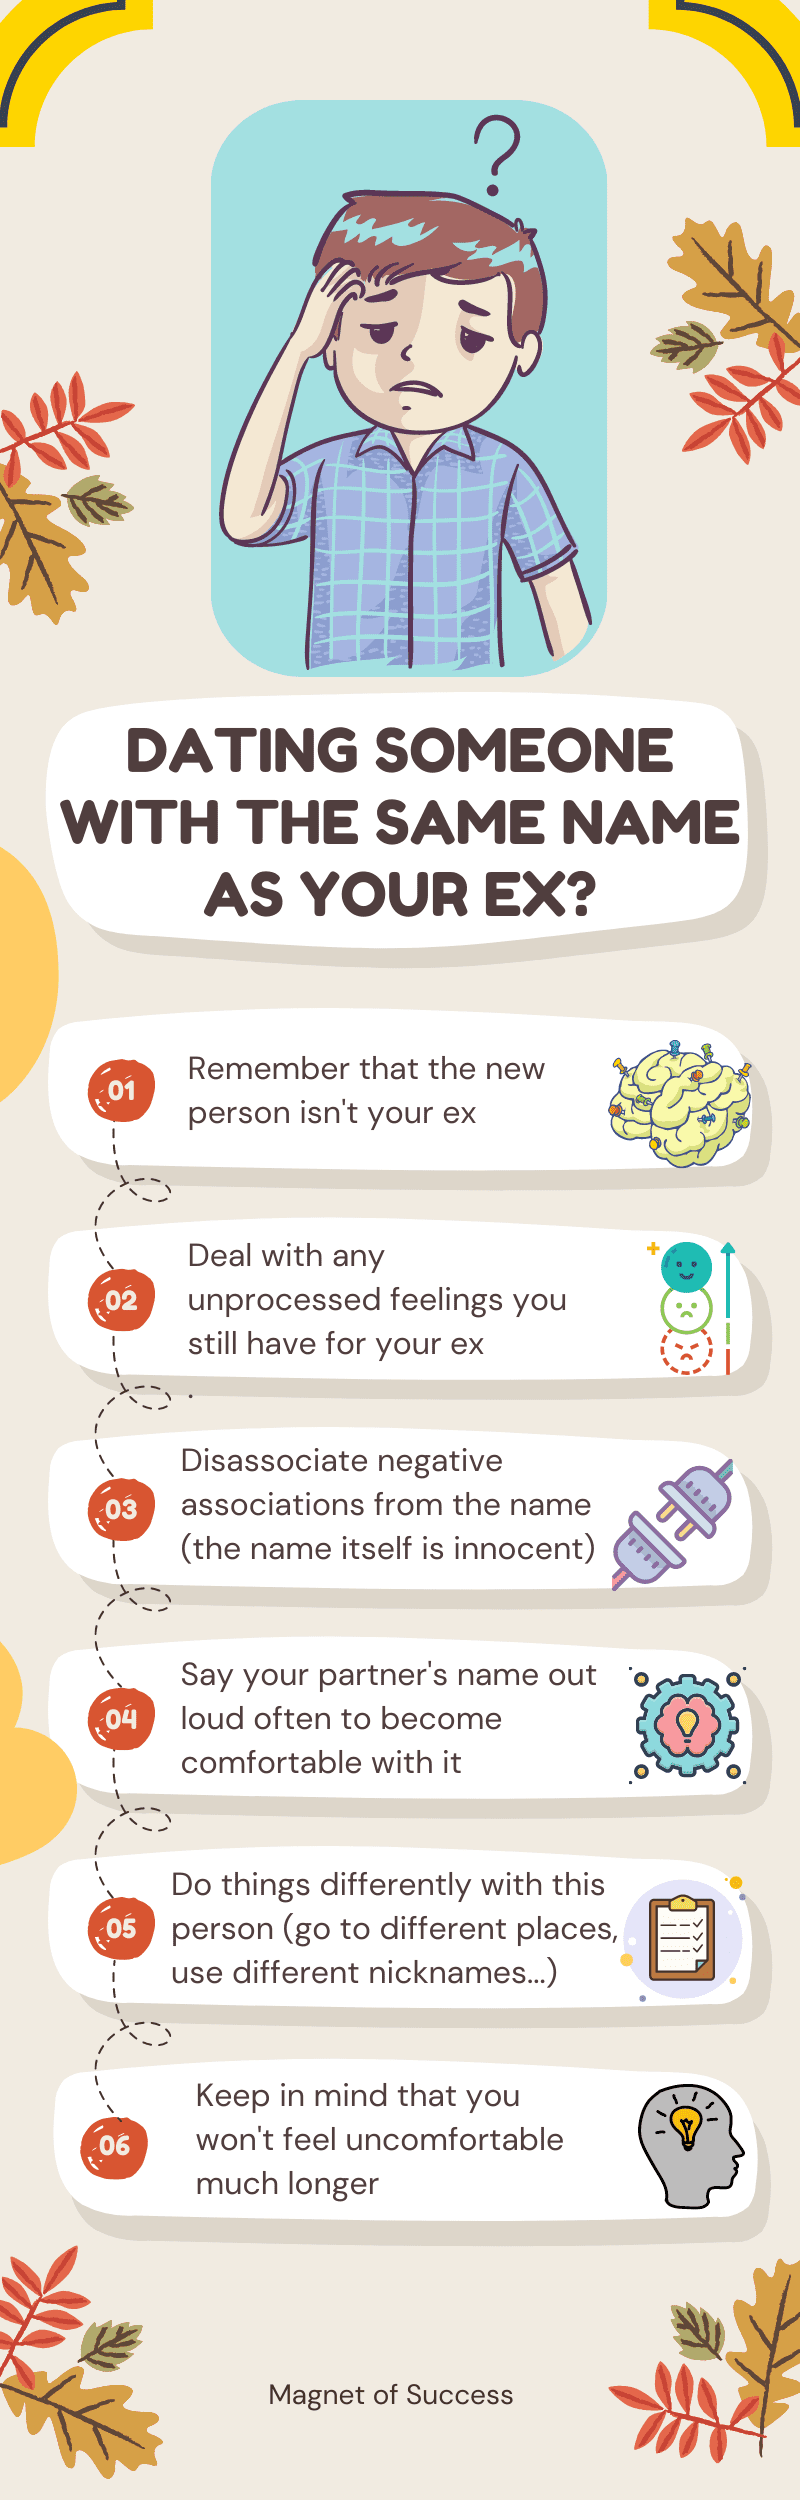 Dating someone with the same name as your ex